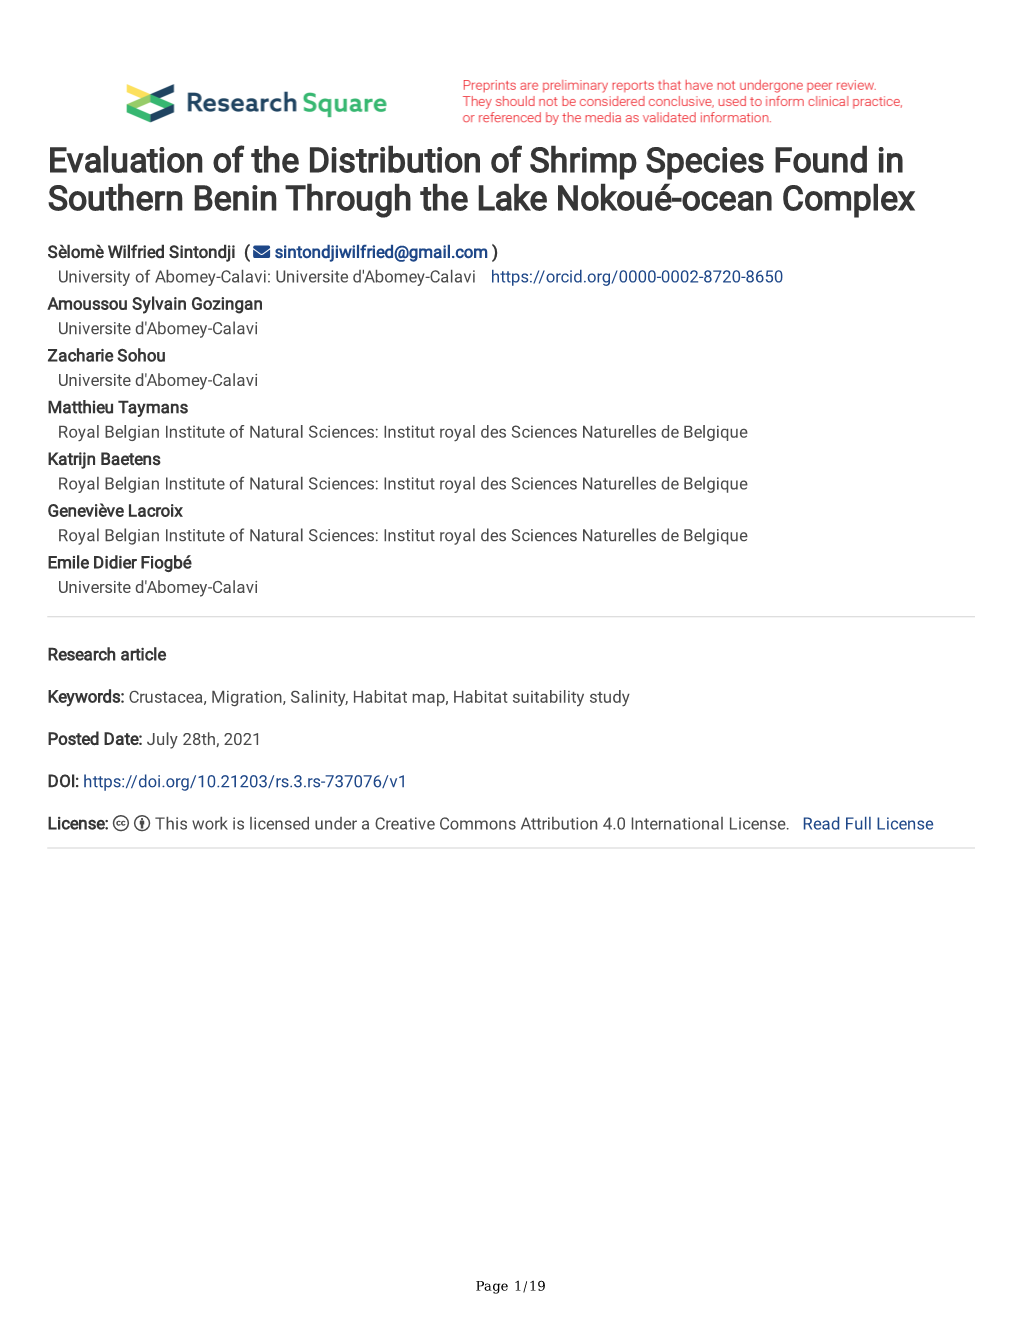 Evaluation of the Distribution of Shrimp Species Found in Southern Benin Through the Lake Nokoué-Ocean Complex